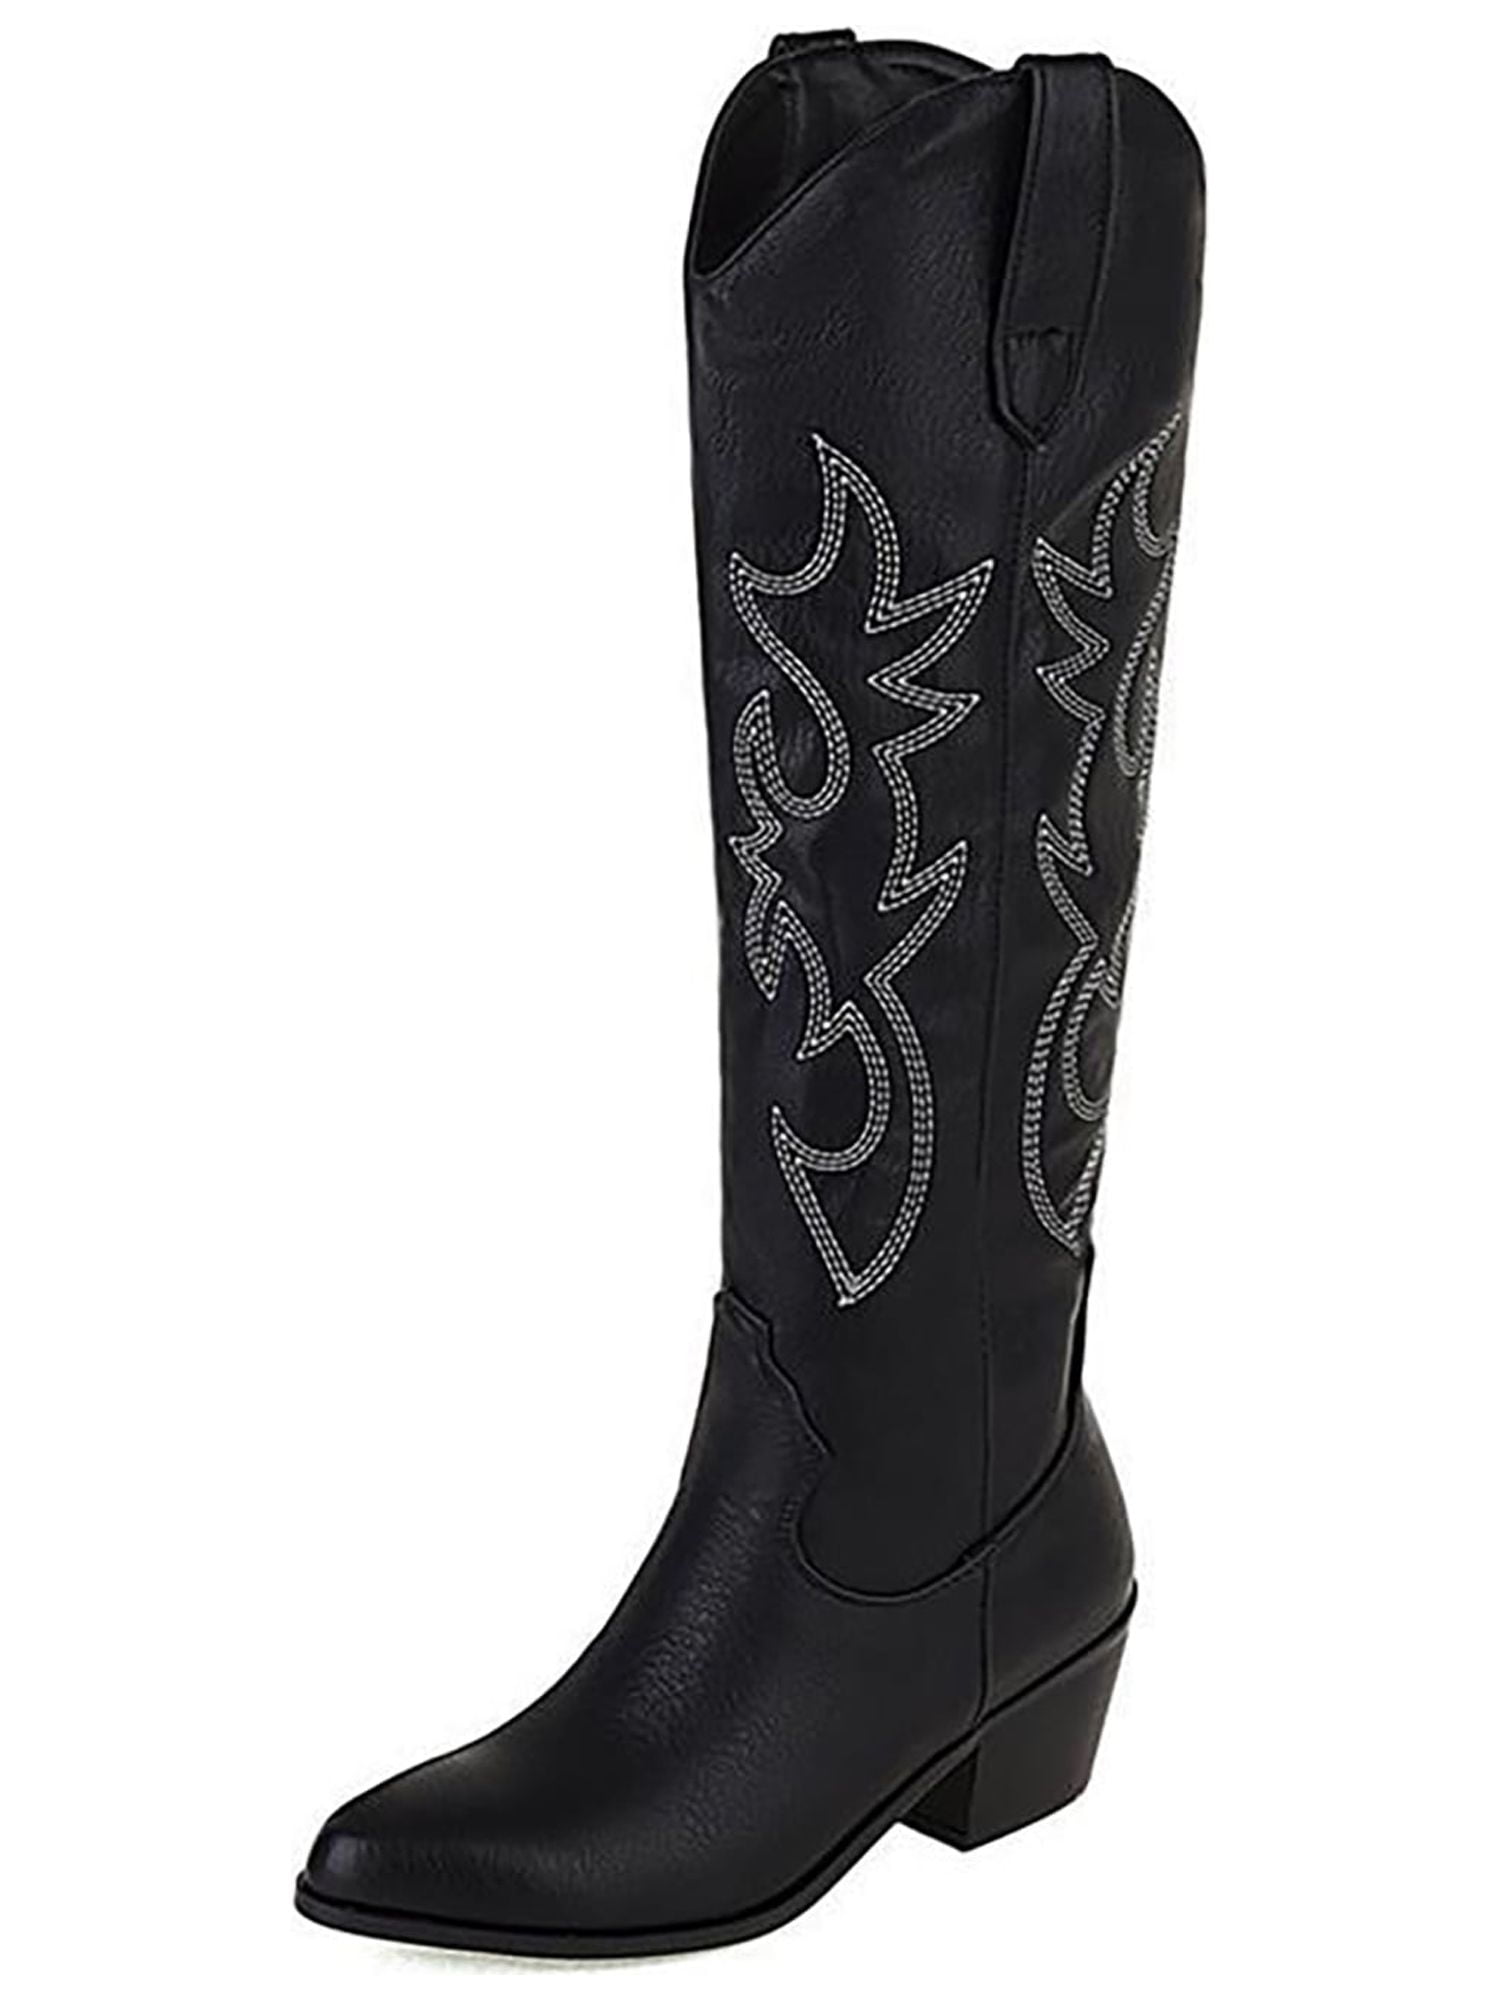 Gomelly Womens Cowboy Boots, Comfortable Pull On Chunky Heel